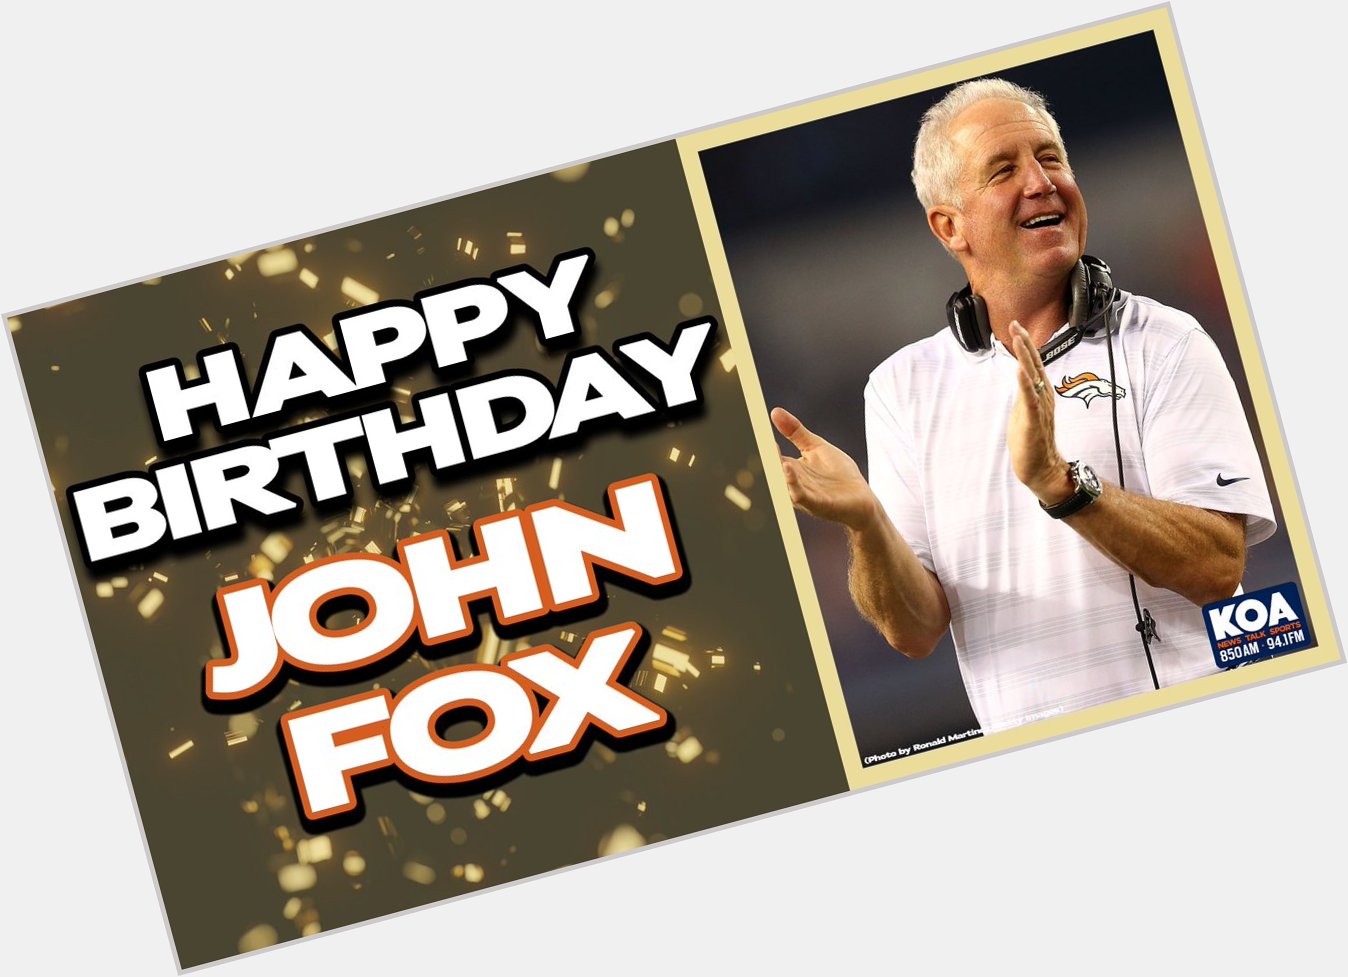 Happy birthday to former head coach John Fox!

What\s your favorite memory from the Fox era in Denver? 